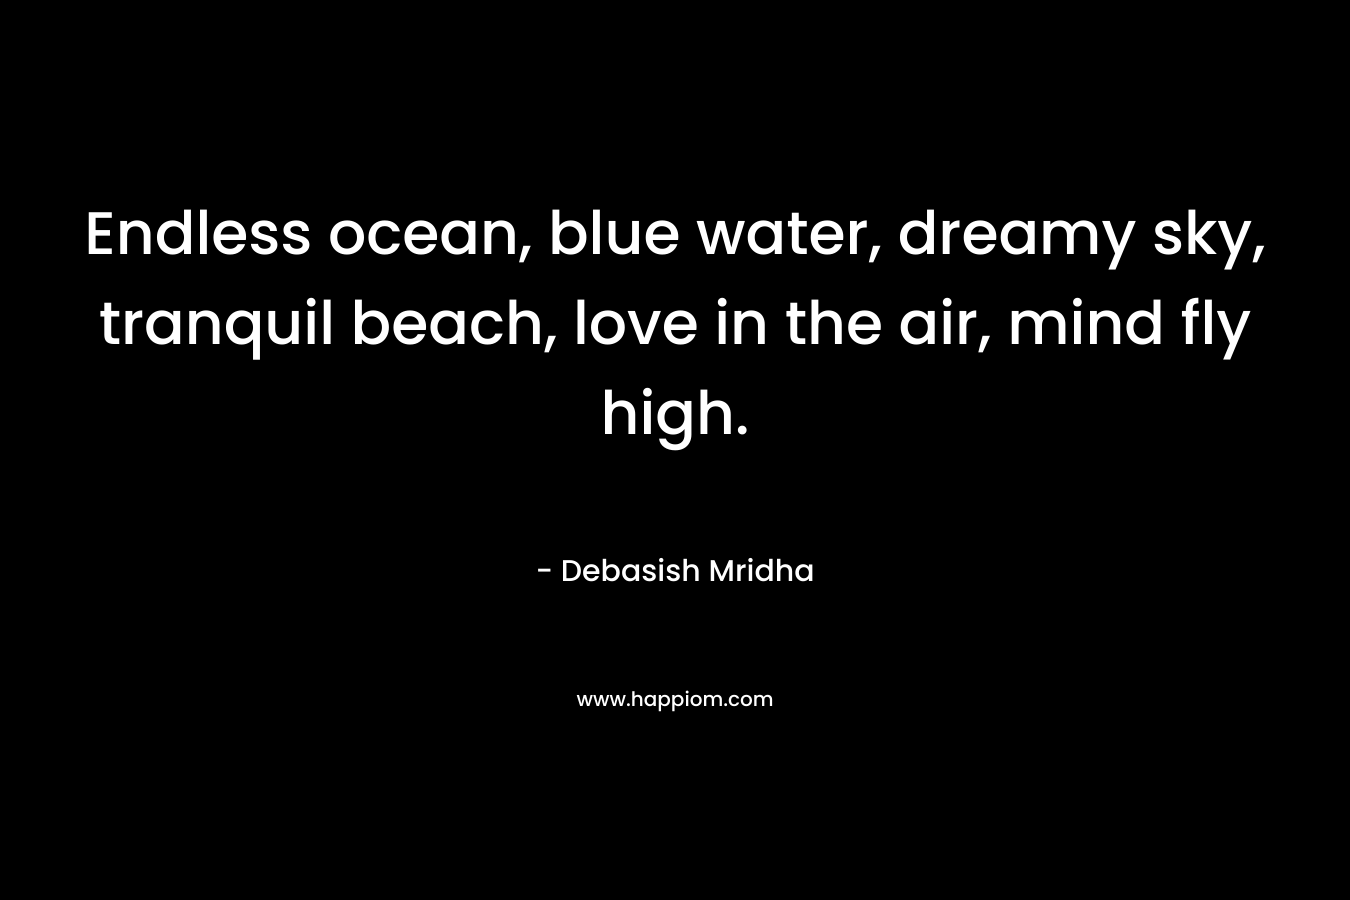 Endless ocean, blue water, dreamy sky, tranquil beach, love in the air, mind fly high.